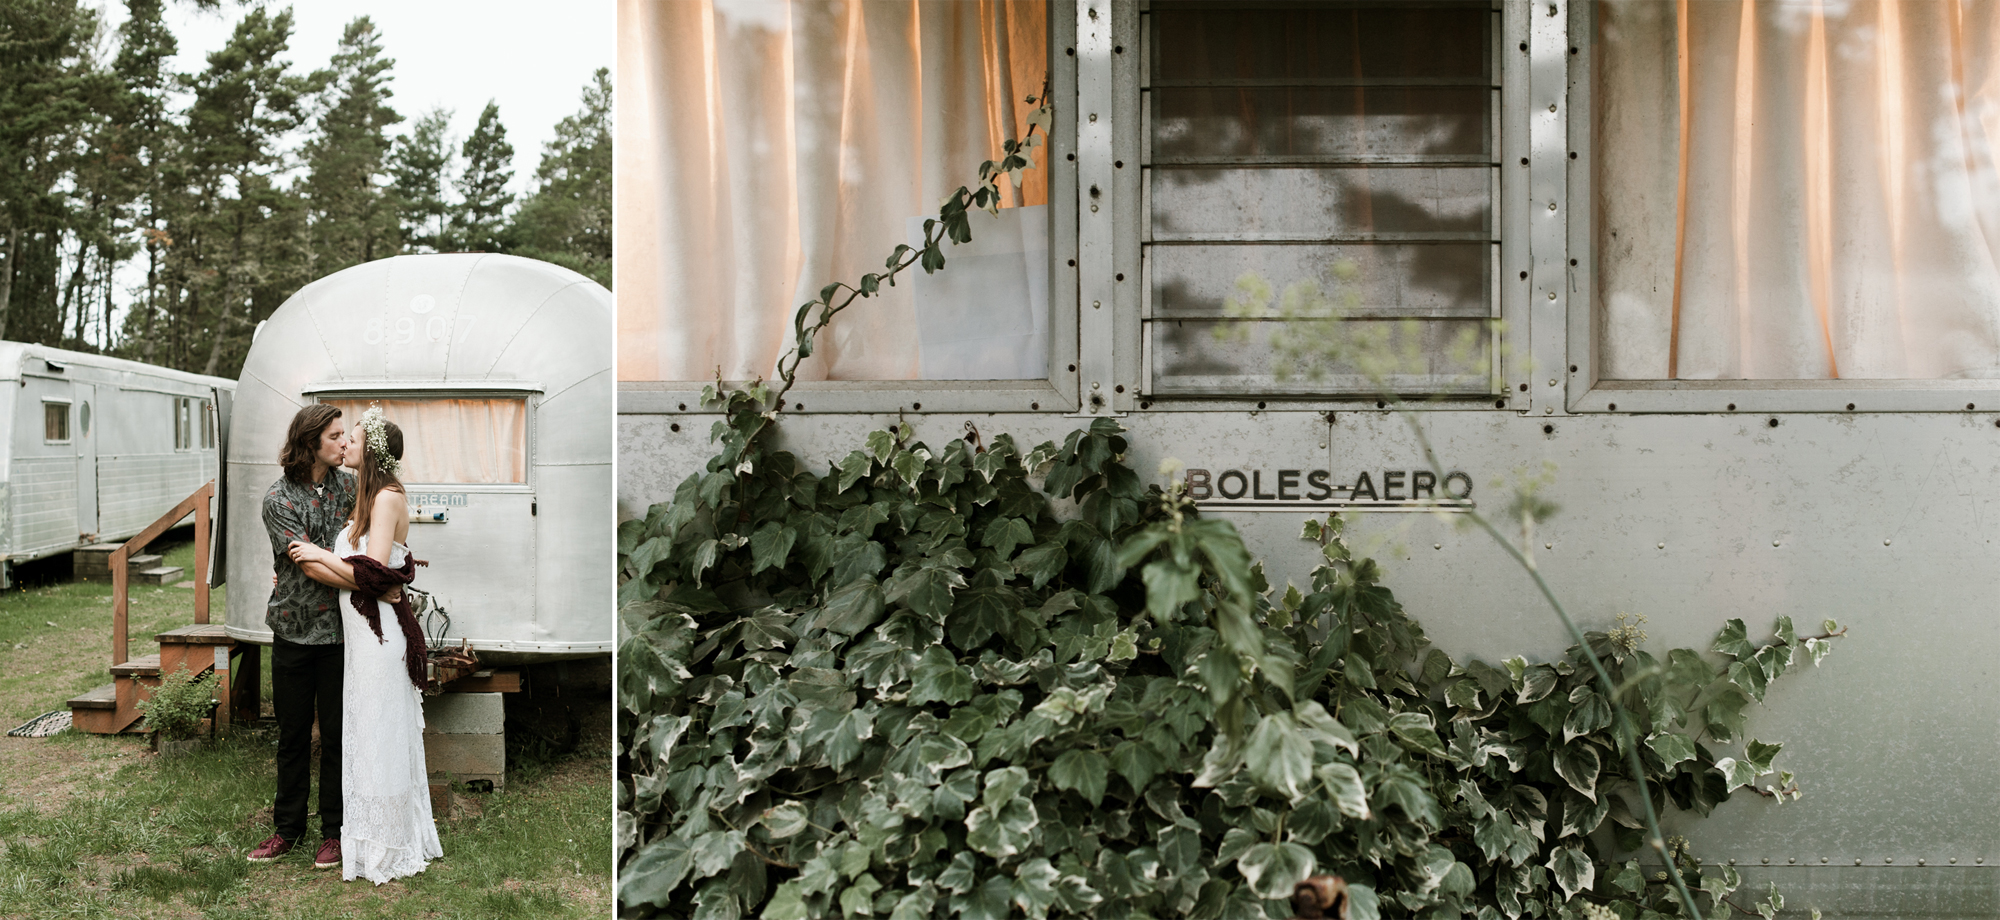 The bride and groom have portraits taken in front of a vintage travel trailer. By Sou'Wester wedding photographer Briana Morrison